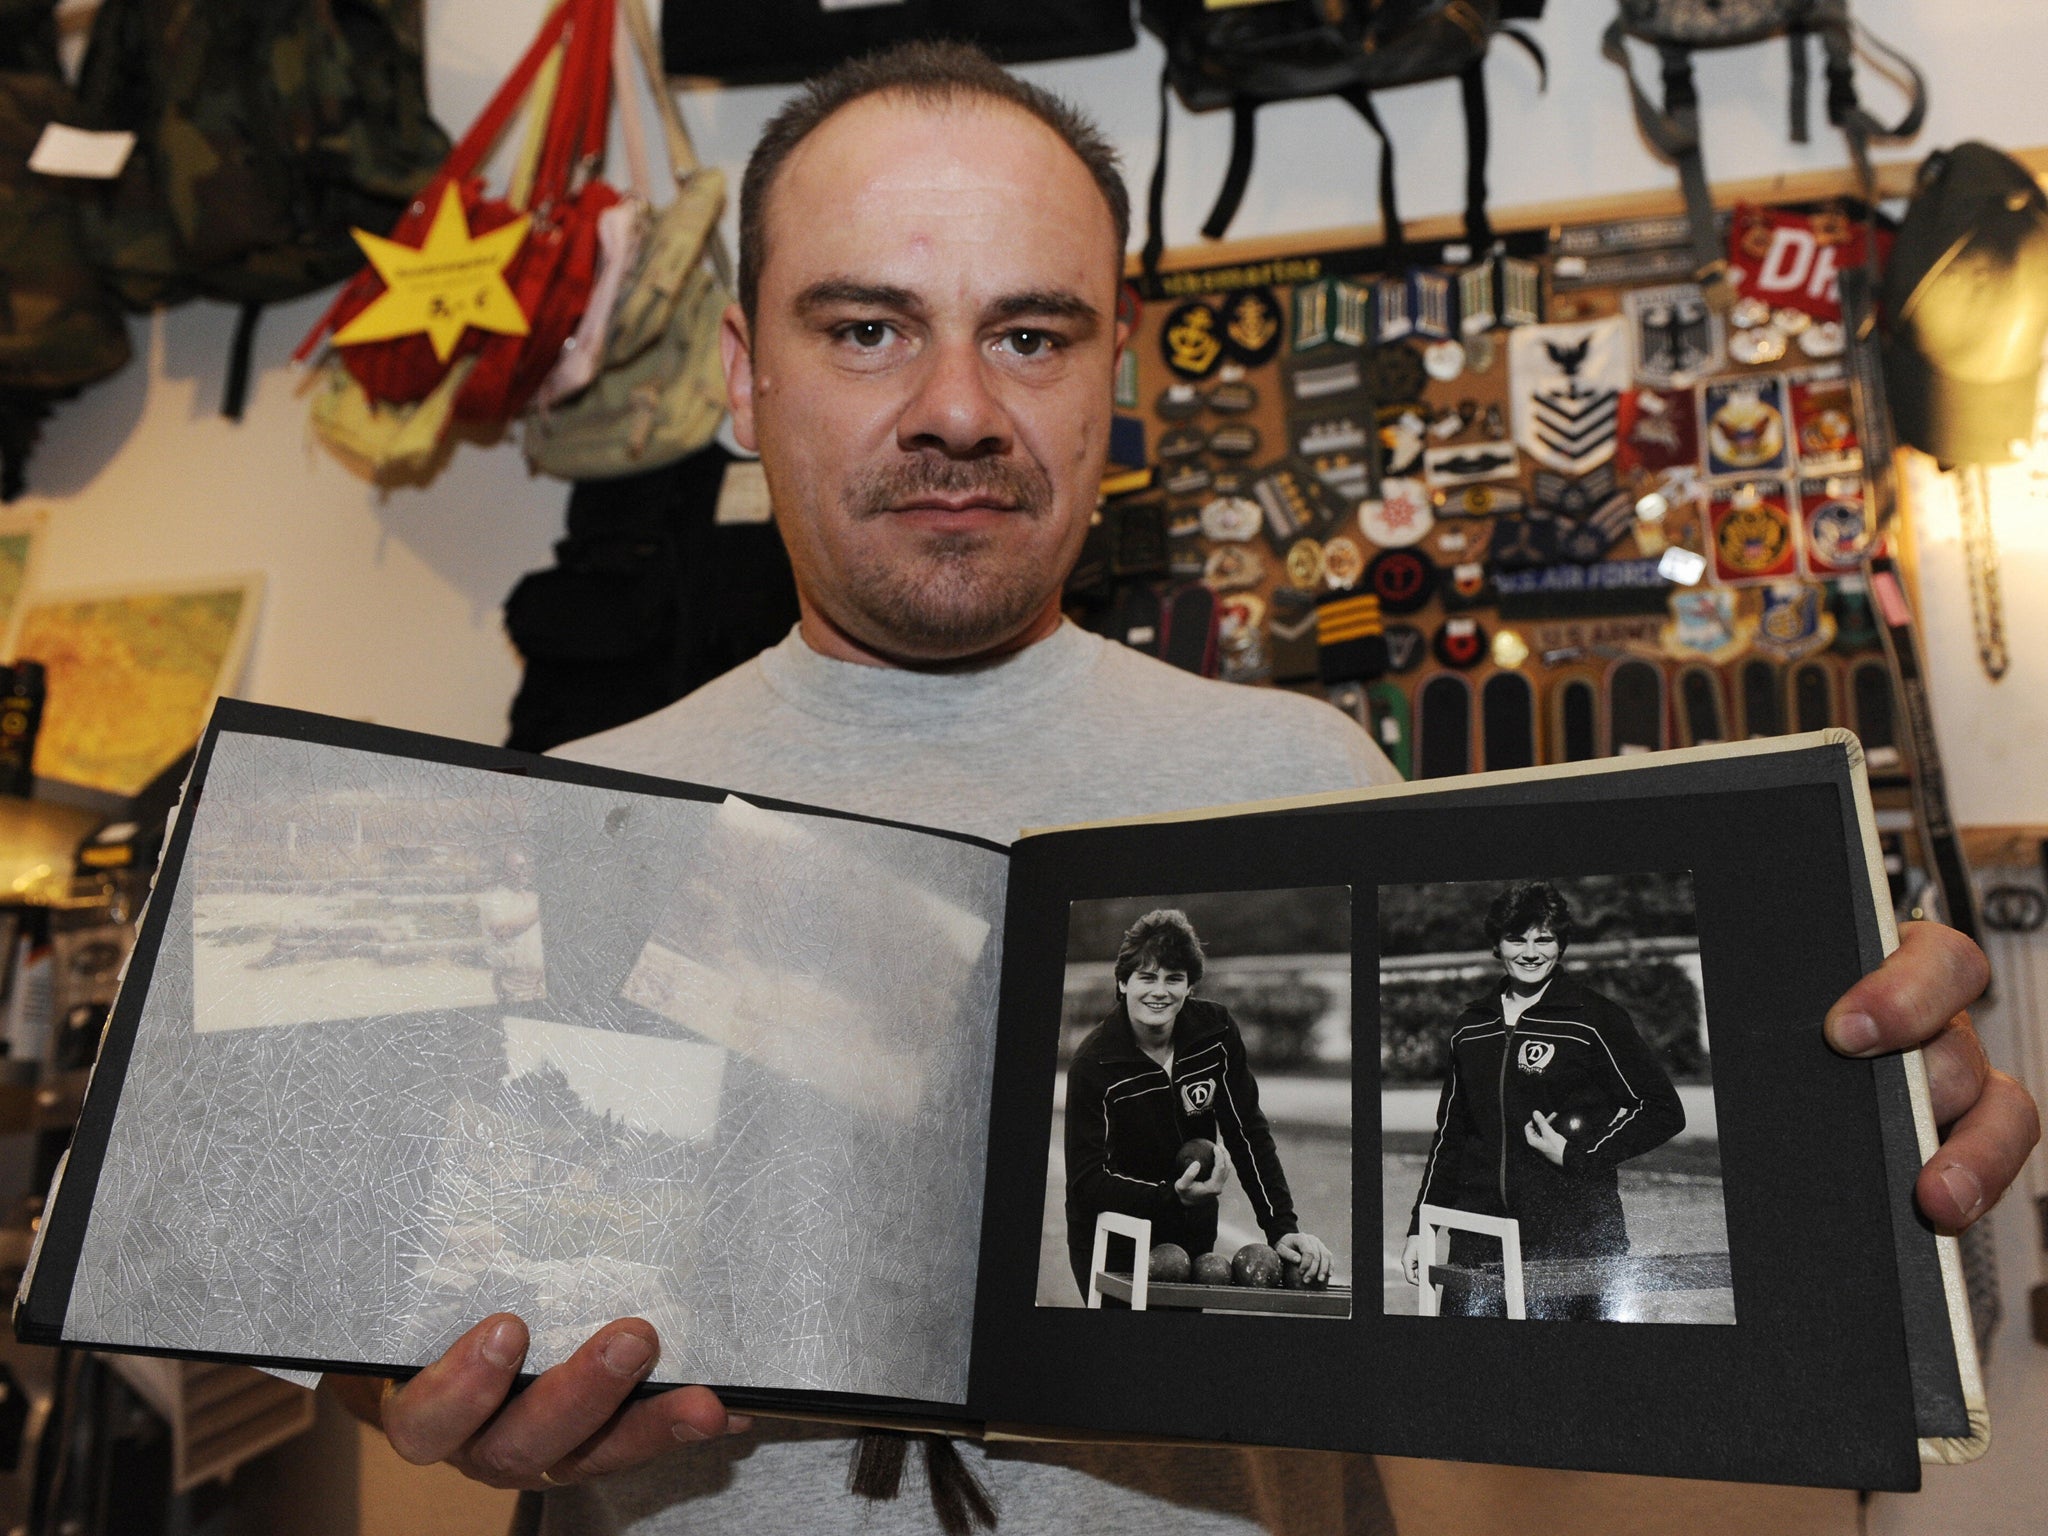 Former German shot putter Andreas Krieger, who competed as a woman (Heidi Krieger) on the East German athletics team, poses with a picture of himself in 1986-87)